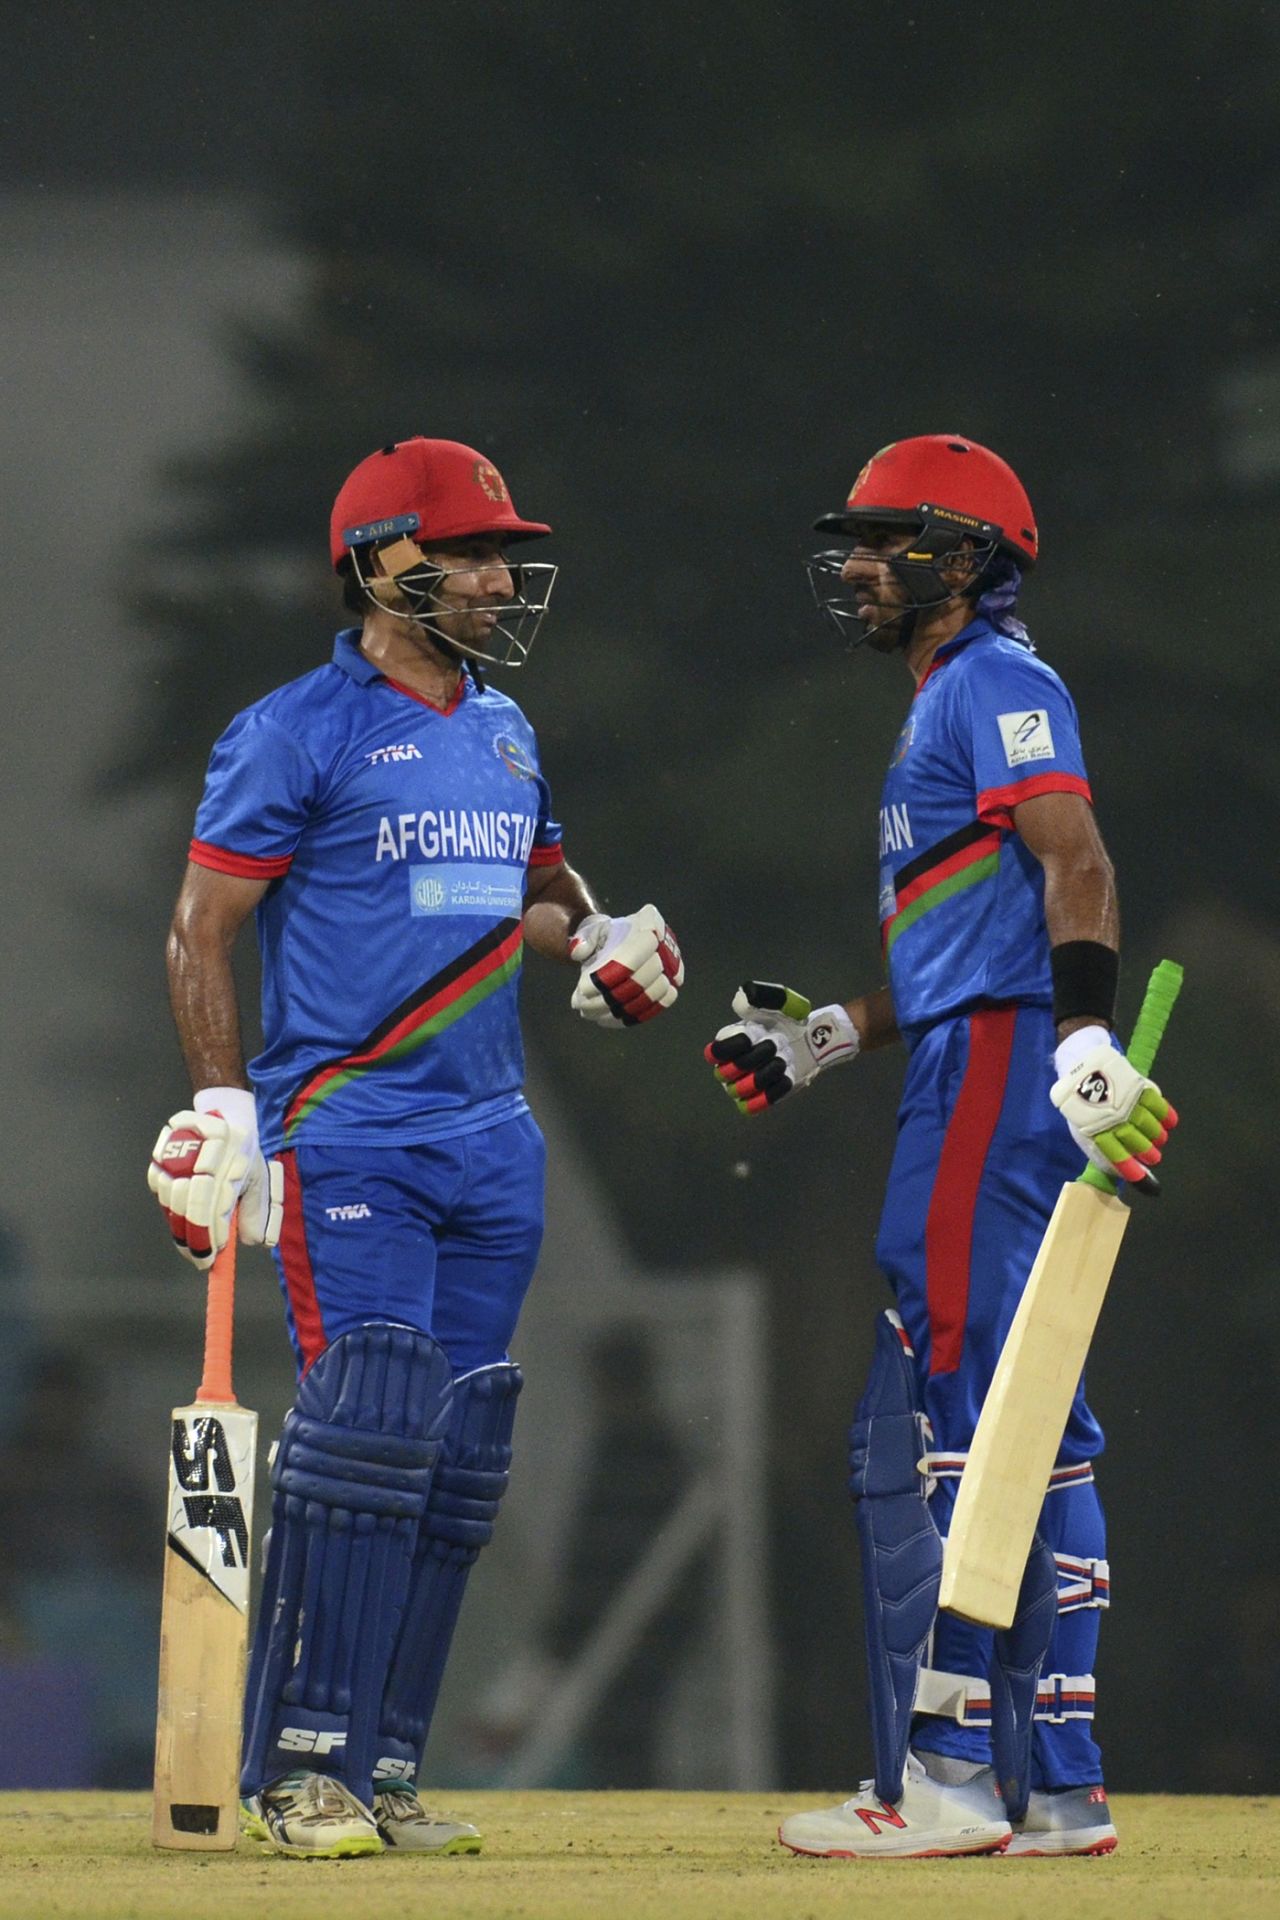 Brothers in arms - Asghar Afghan and Karim Janat, Afghanistan v West Indies, 2nd T20I, Lucknow, November 16, 2019